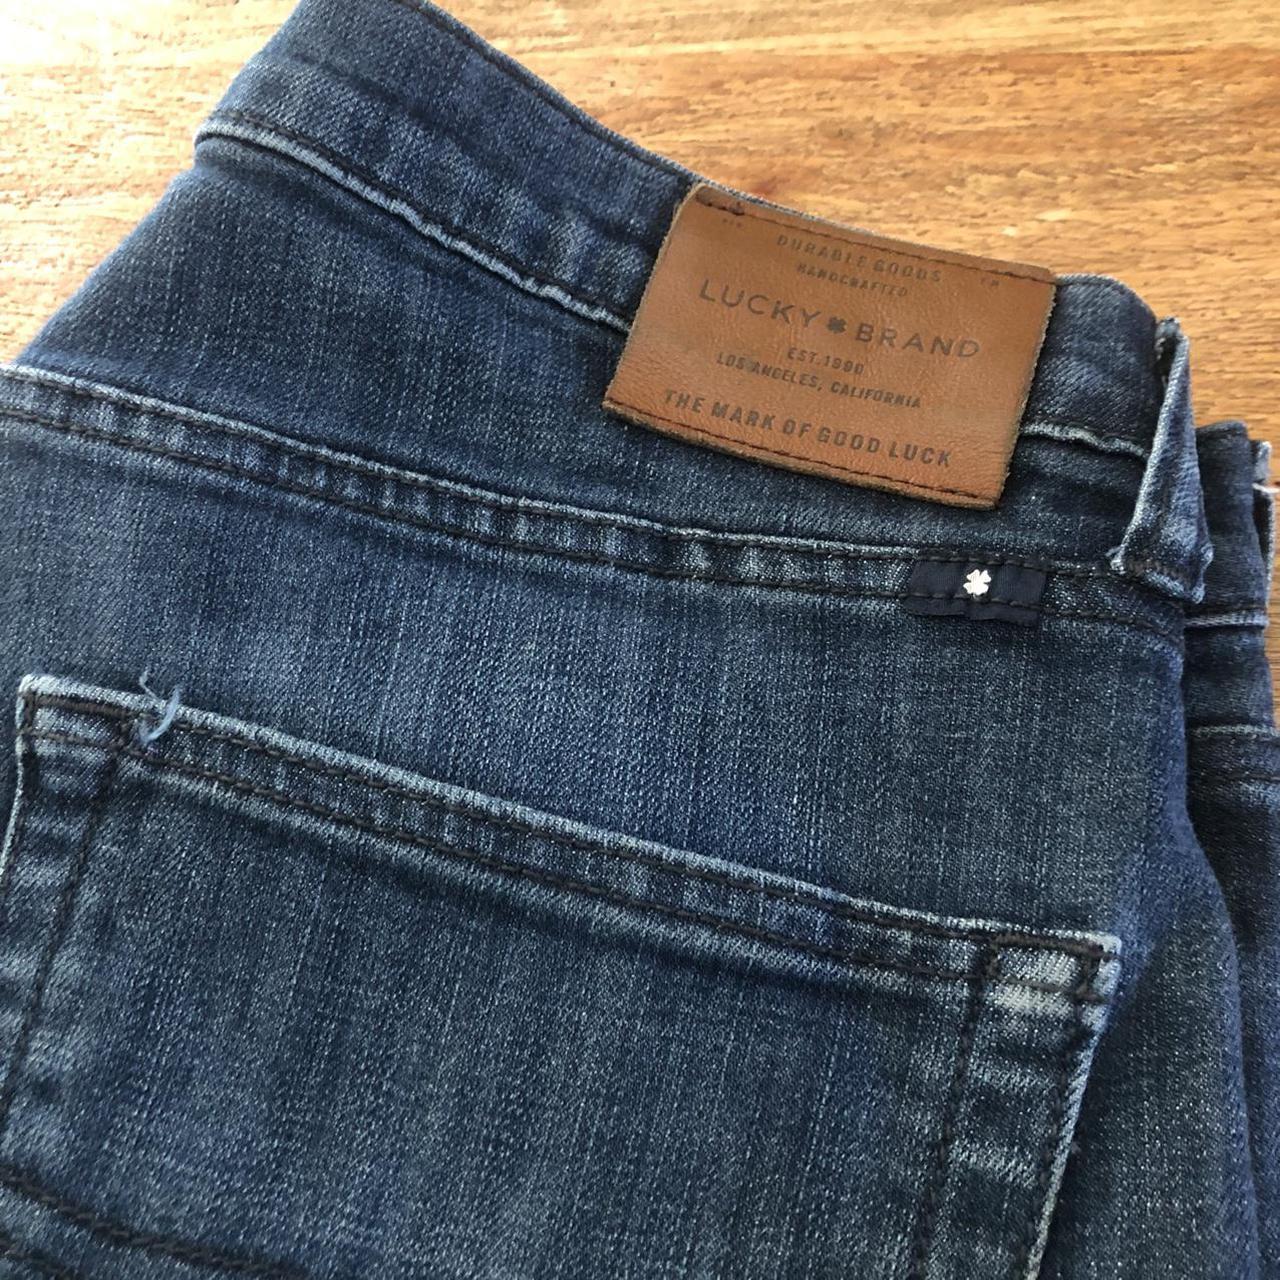 Product Image 2 - Lucky Brand 410 Athletic Slim